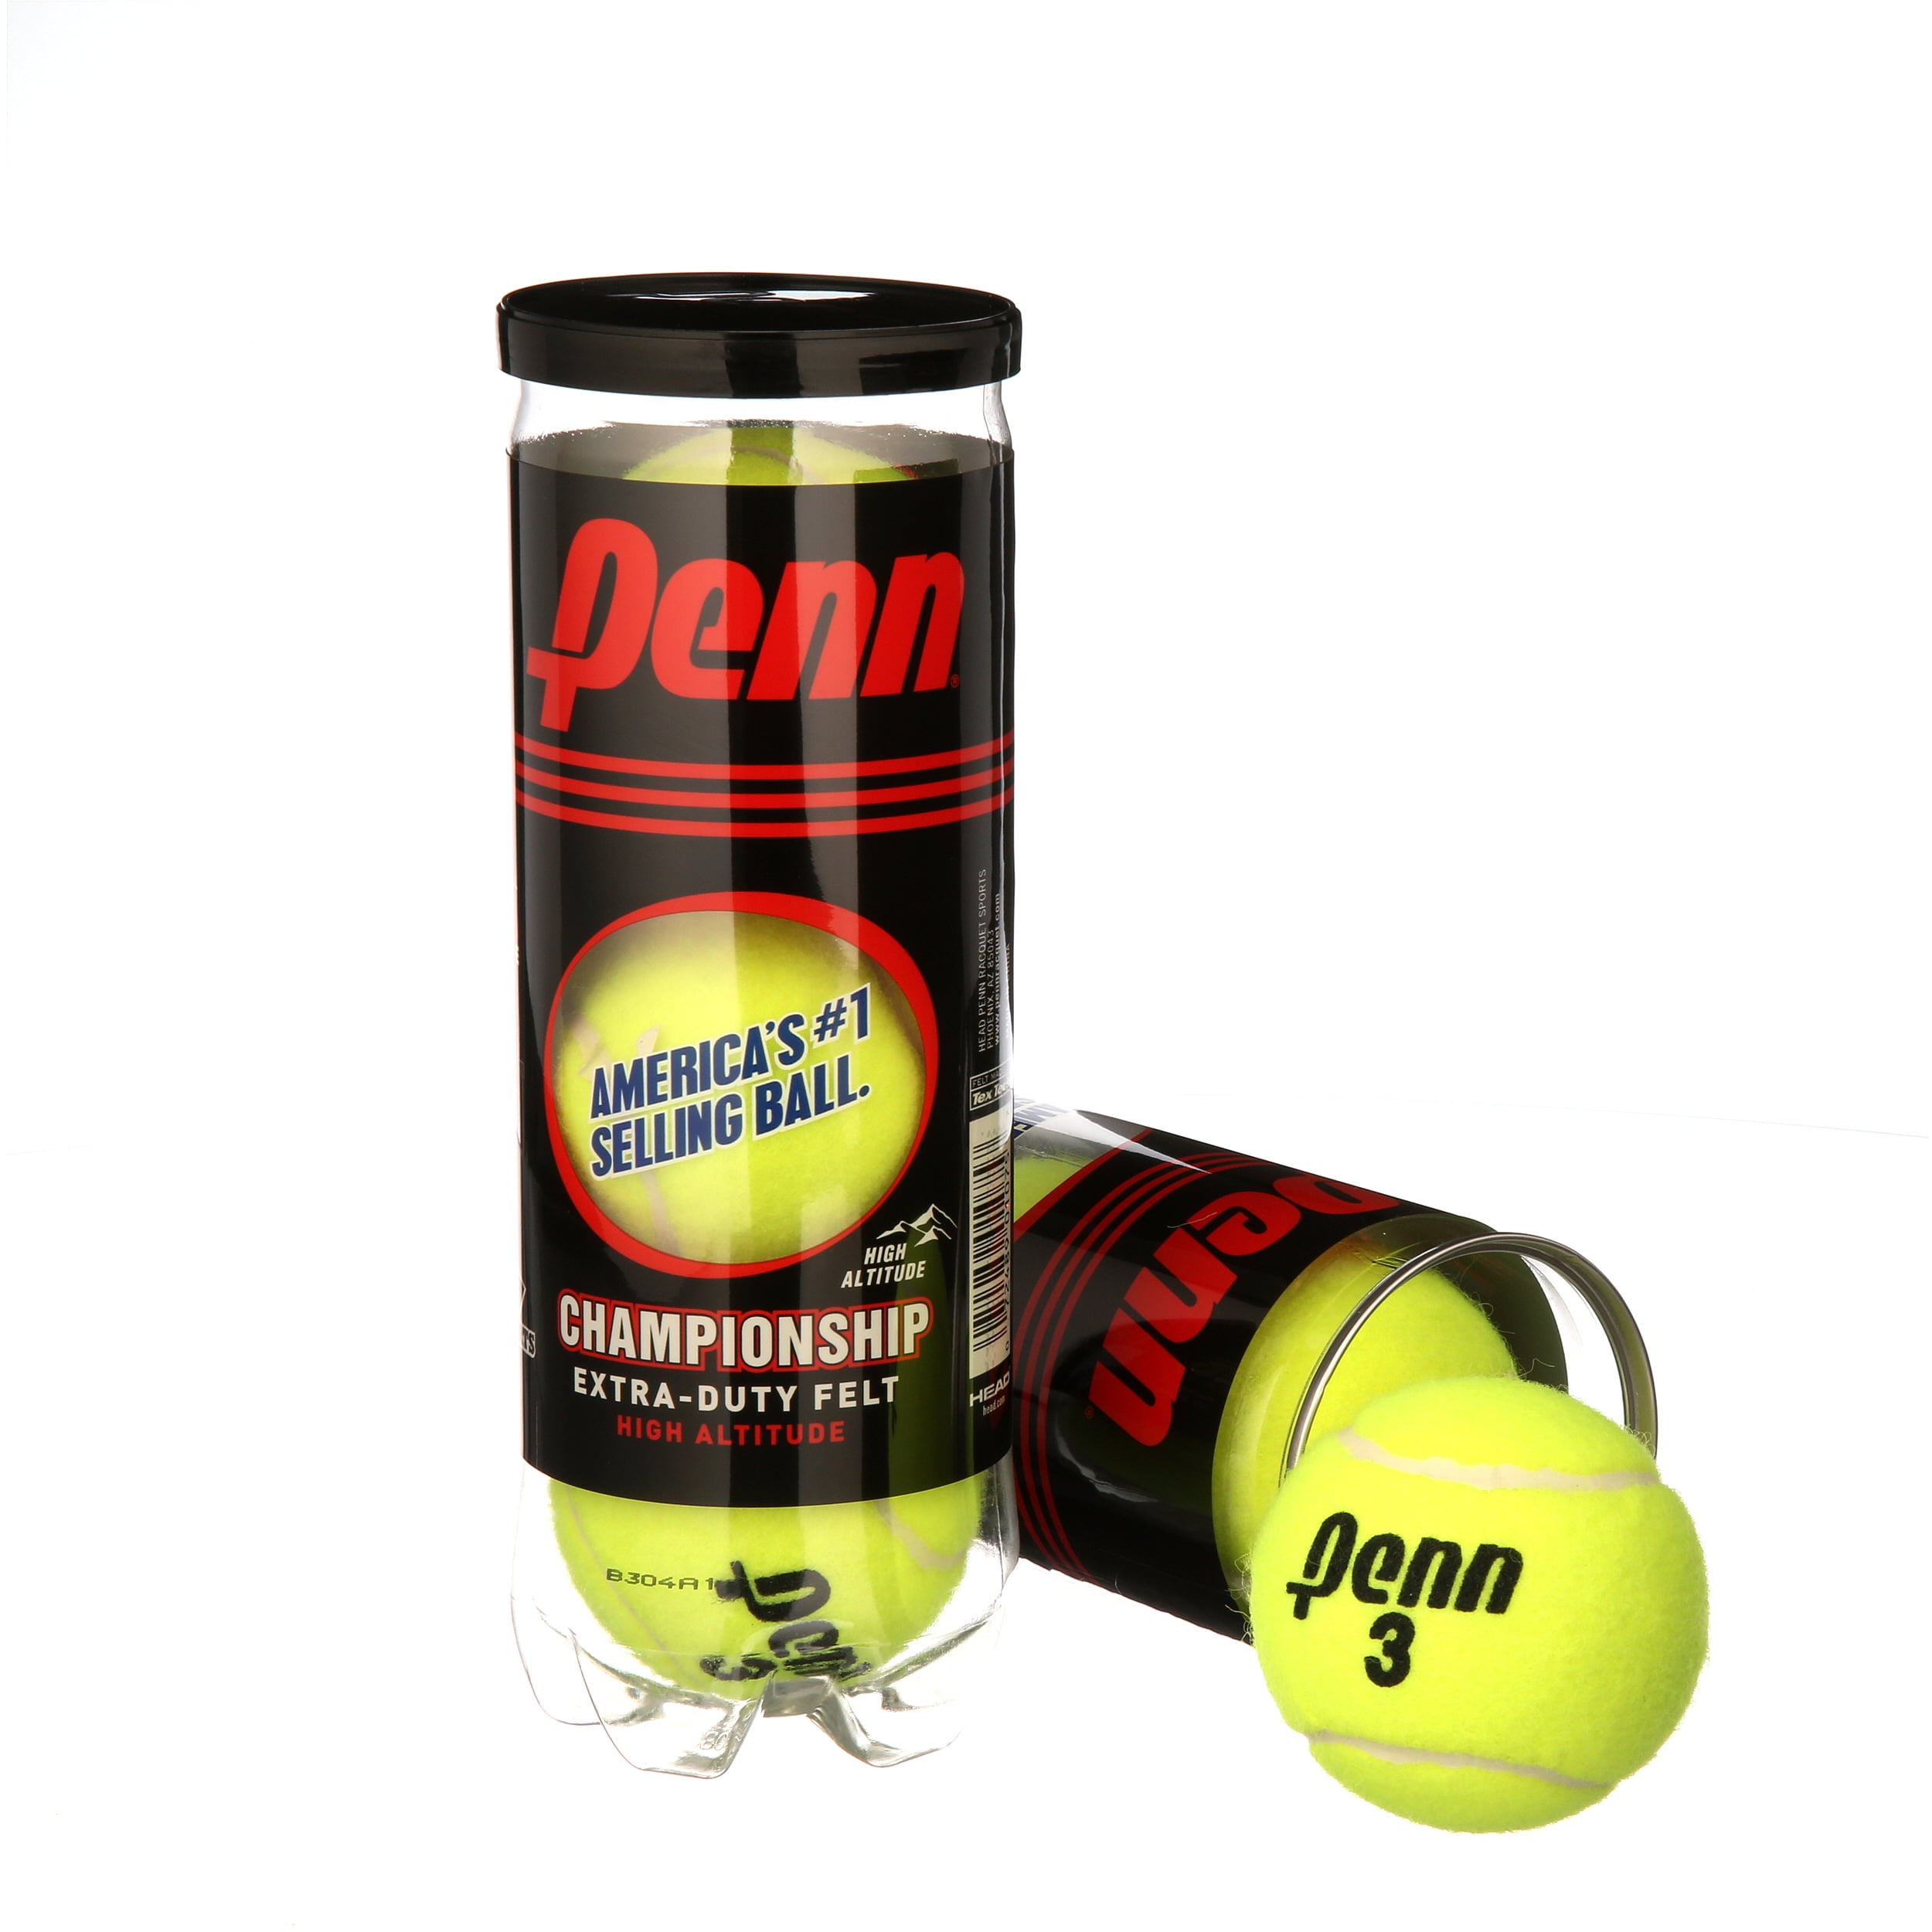 Details about   VINTAGE PENN USTA TENNIS BALLS IN THE CAN Championship Quality 